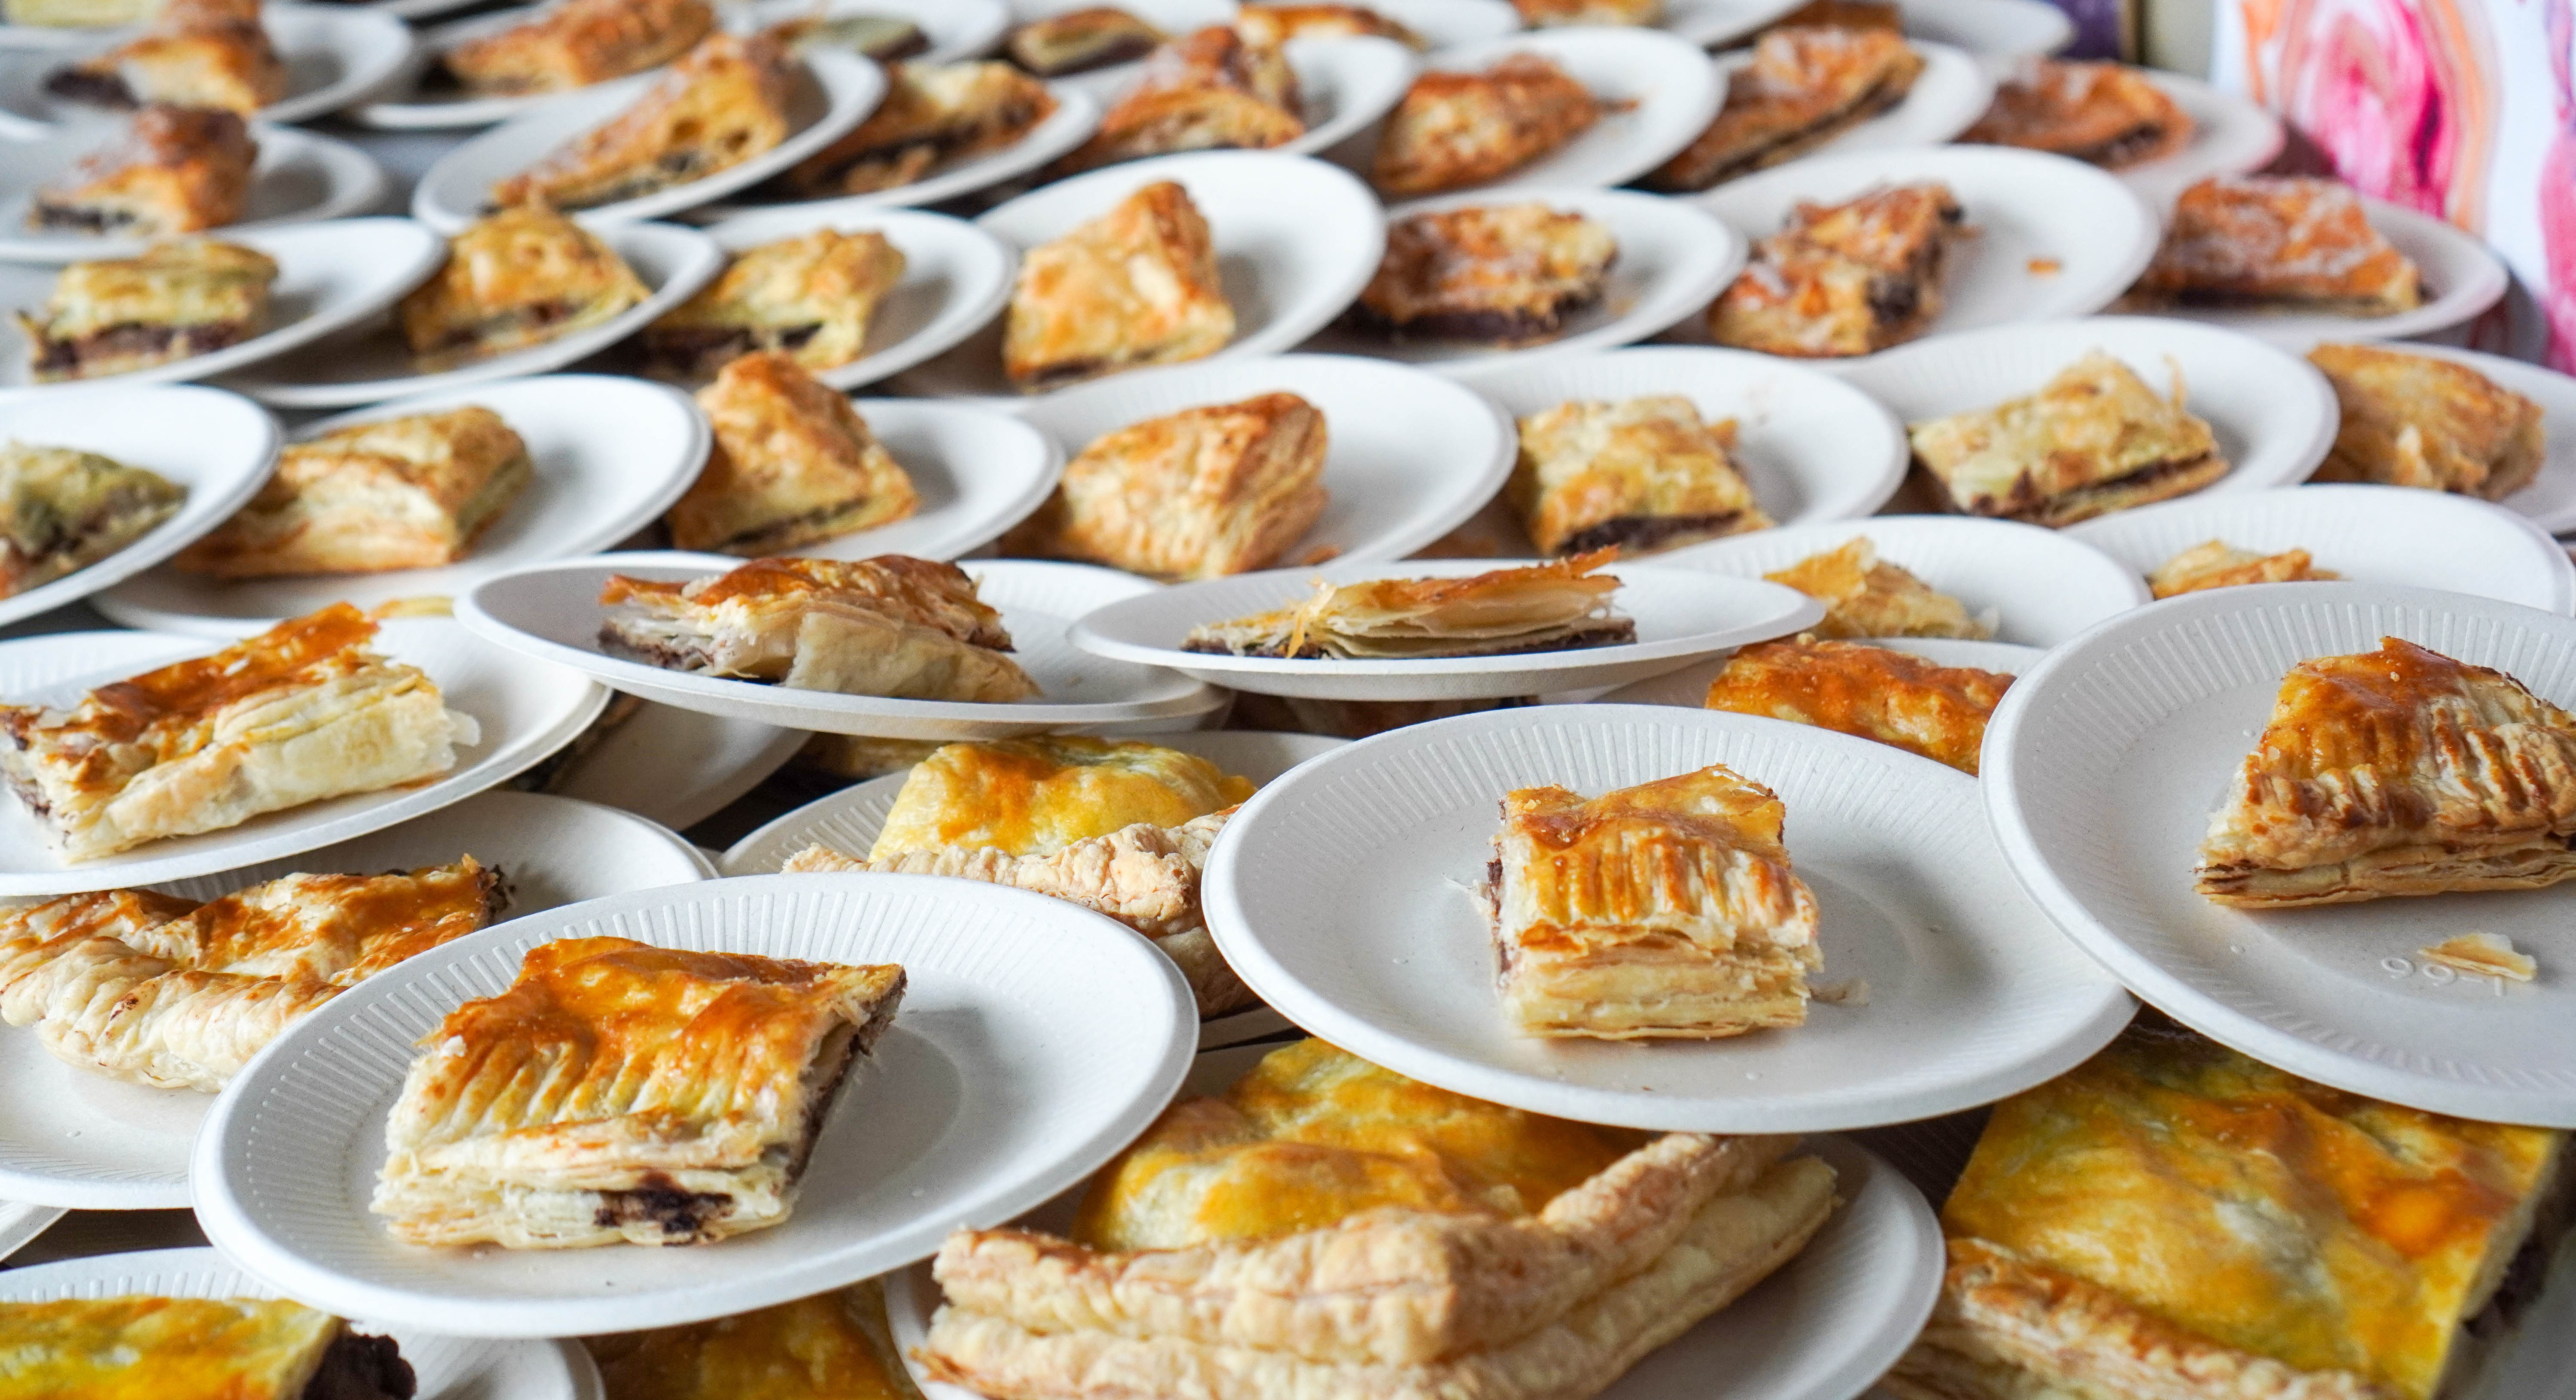 A table of galette's ready to serve the students during the lunch time celebration.